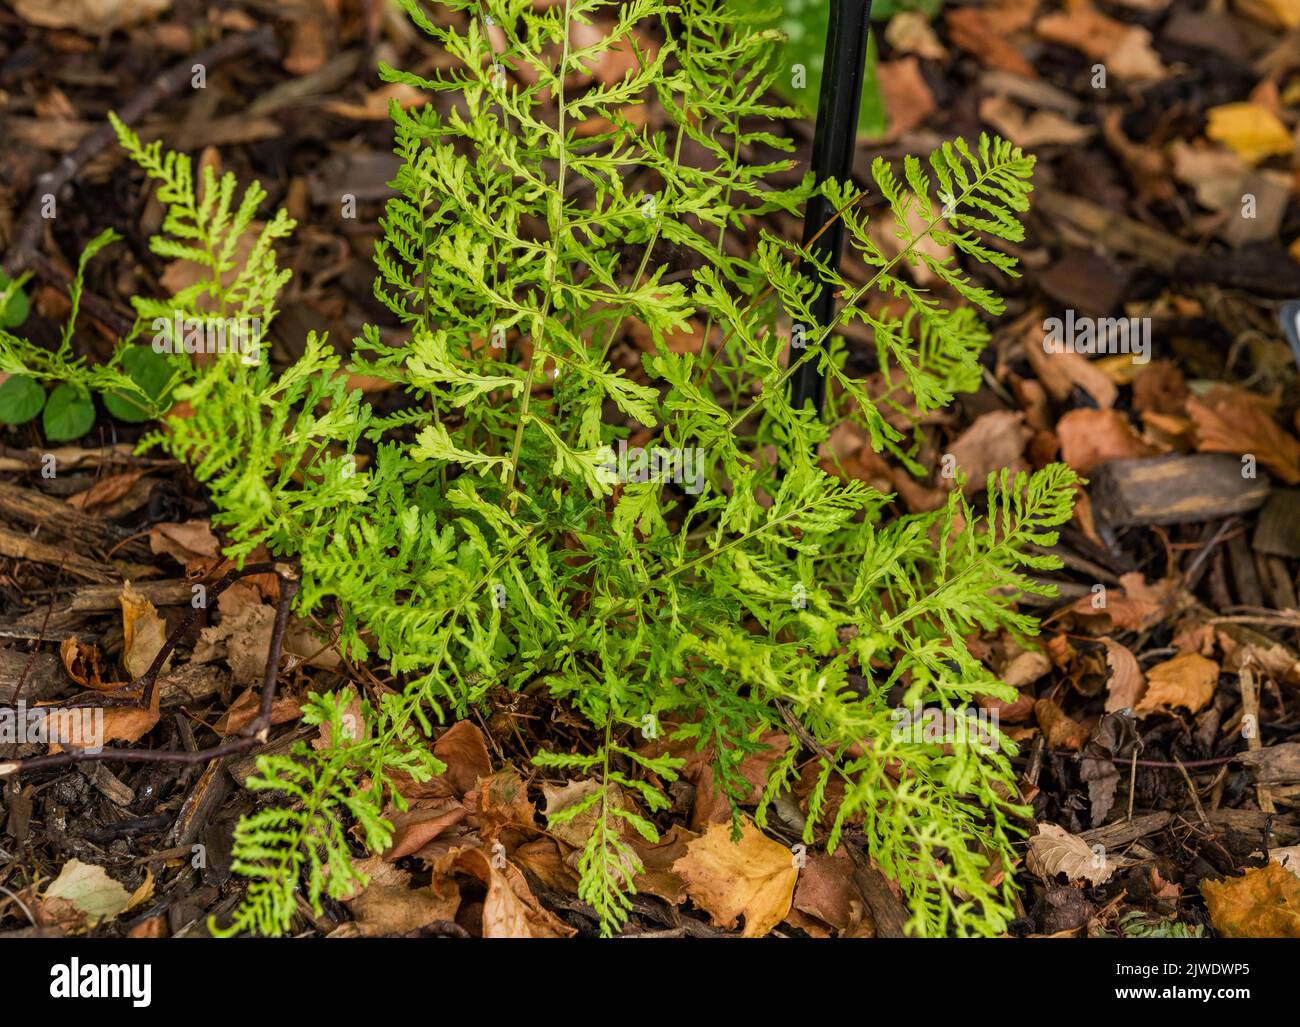 Dryopteris Affinis. Scaly Male Fern. Stock Photo